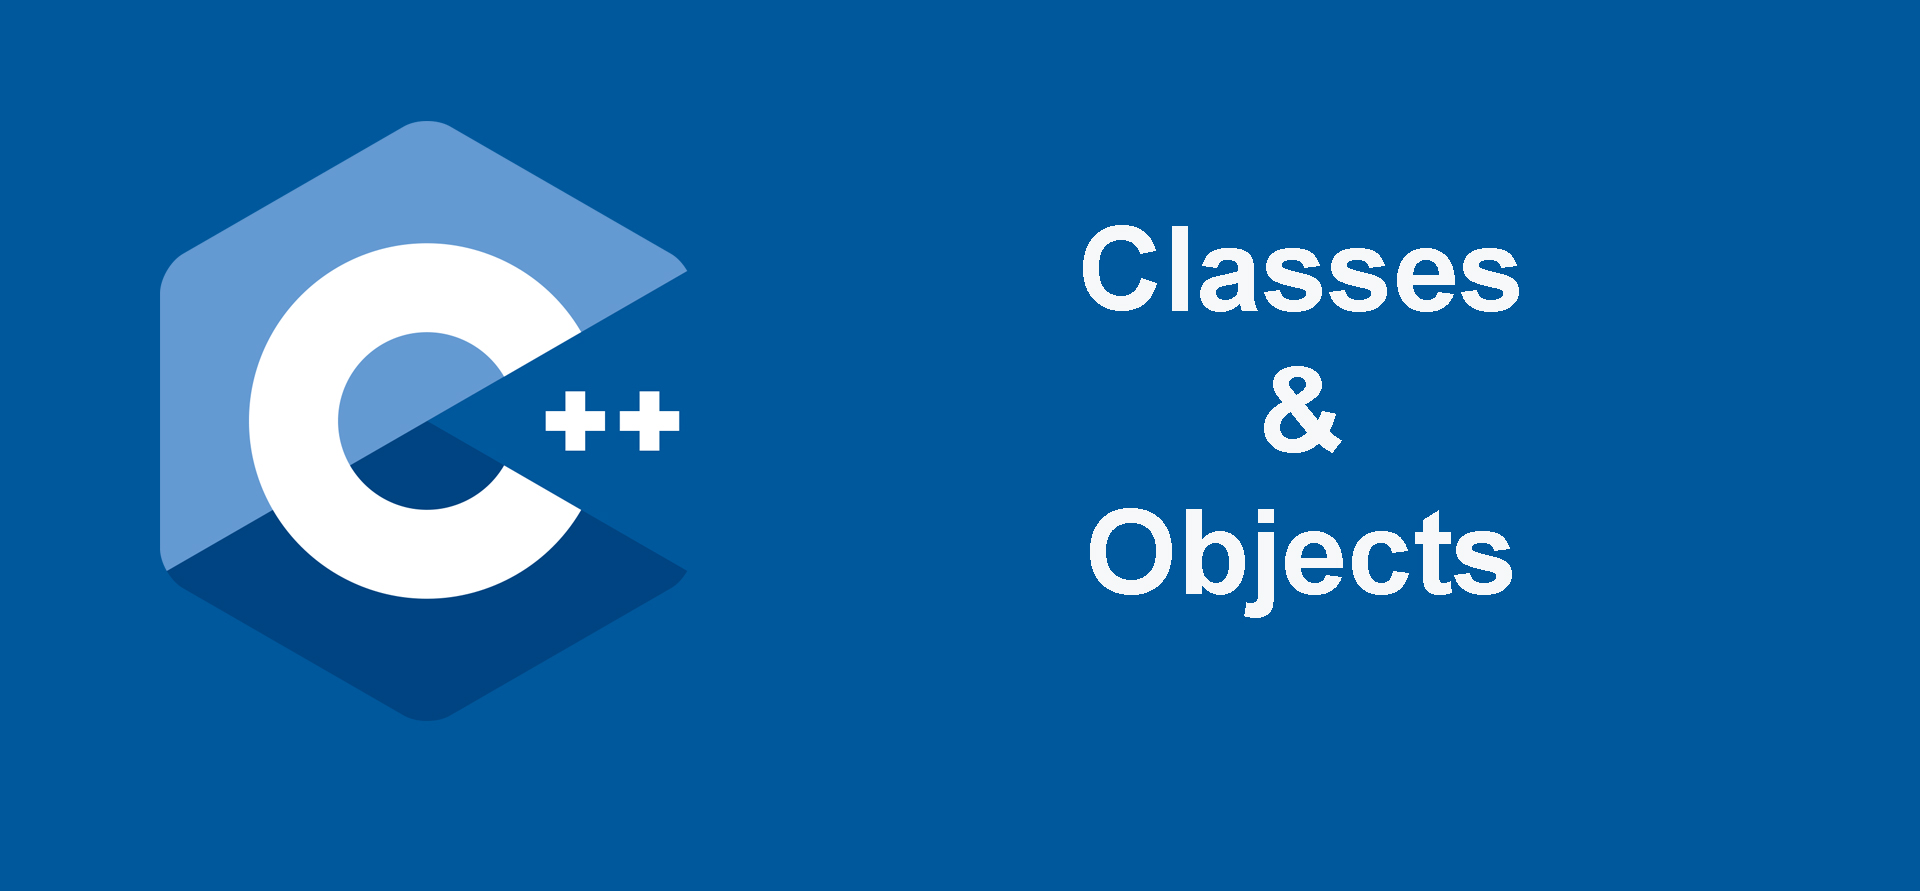 Classes and Objects in C++ Programming